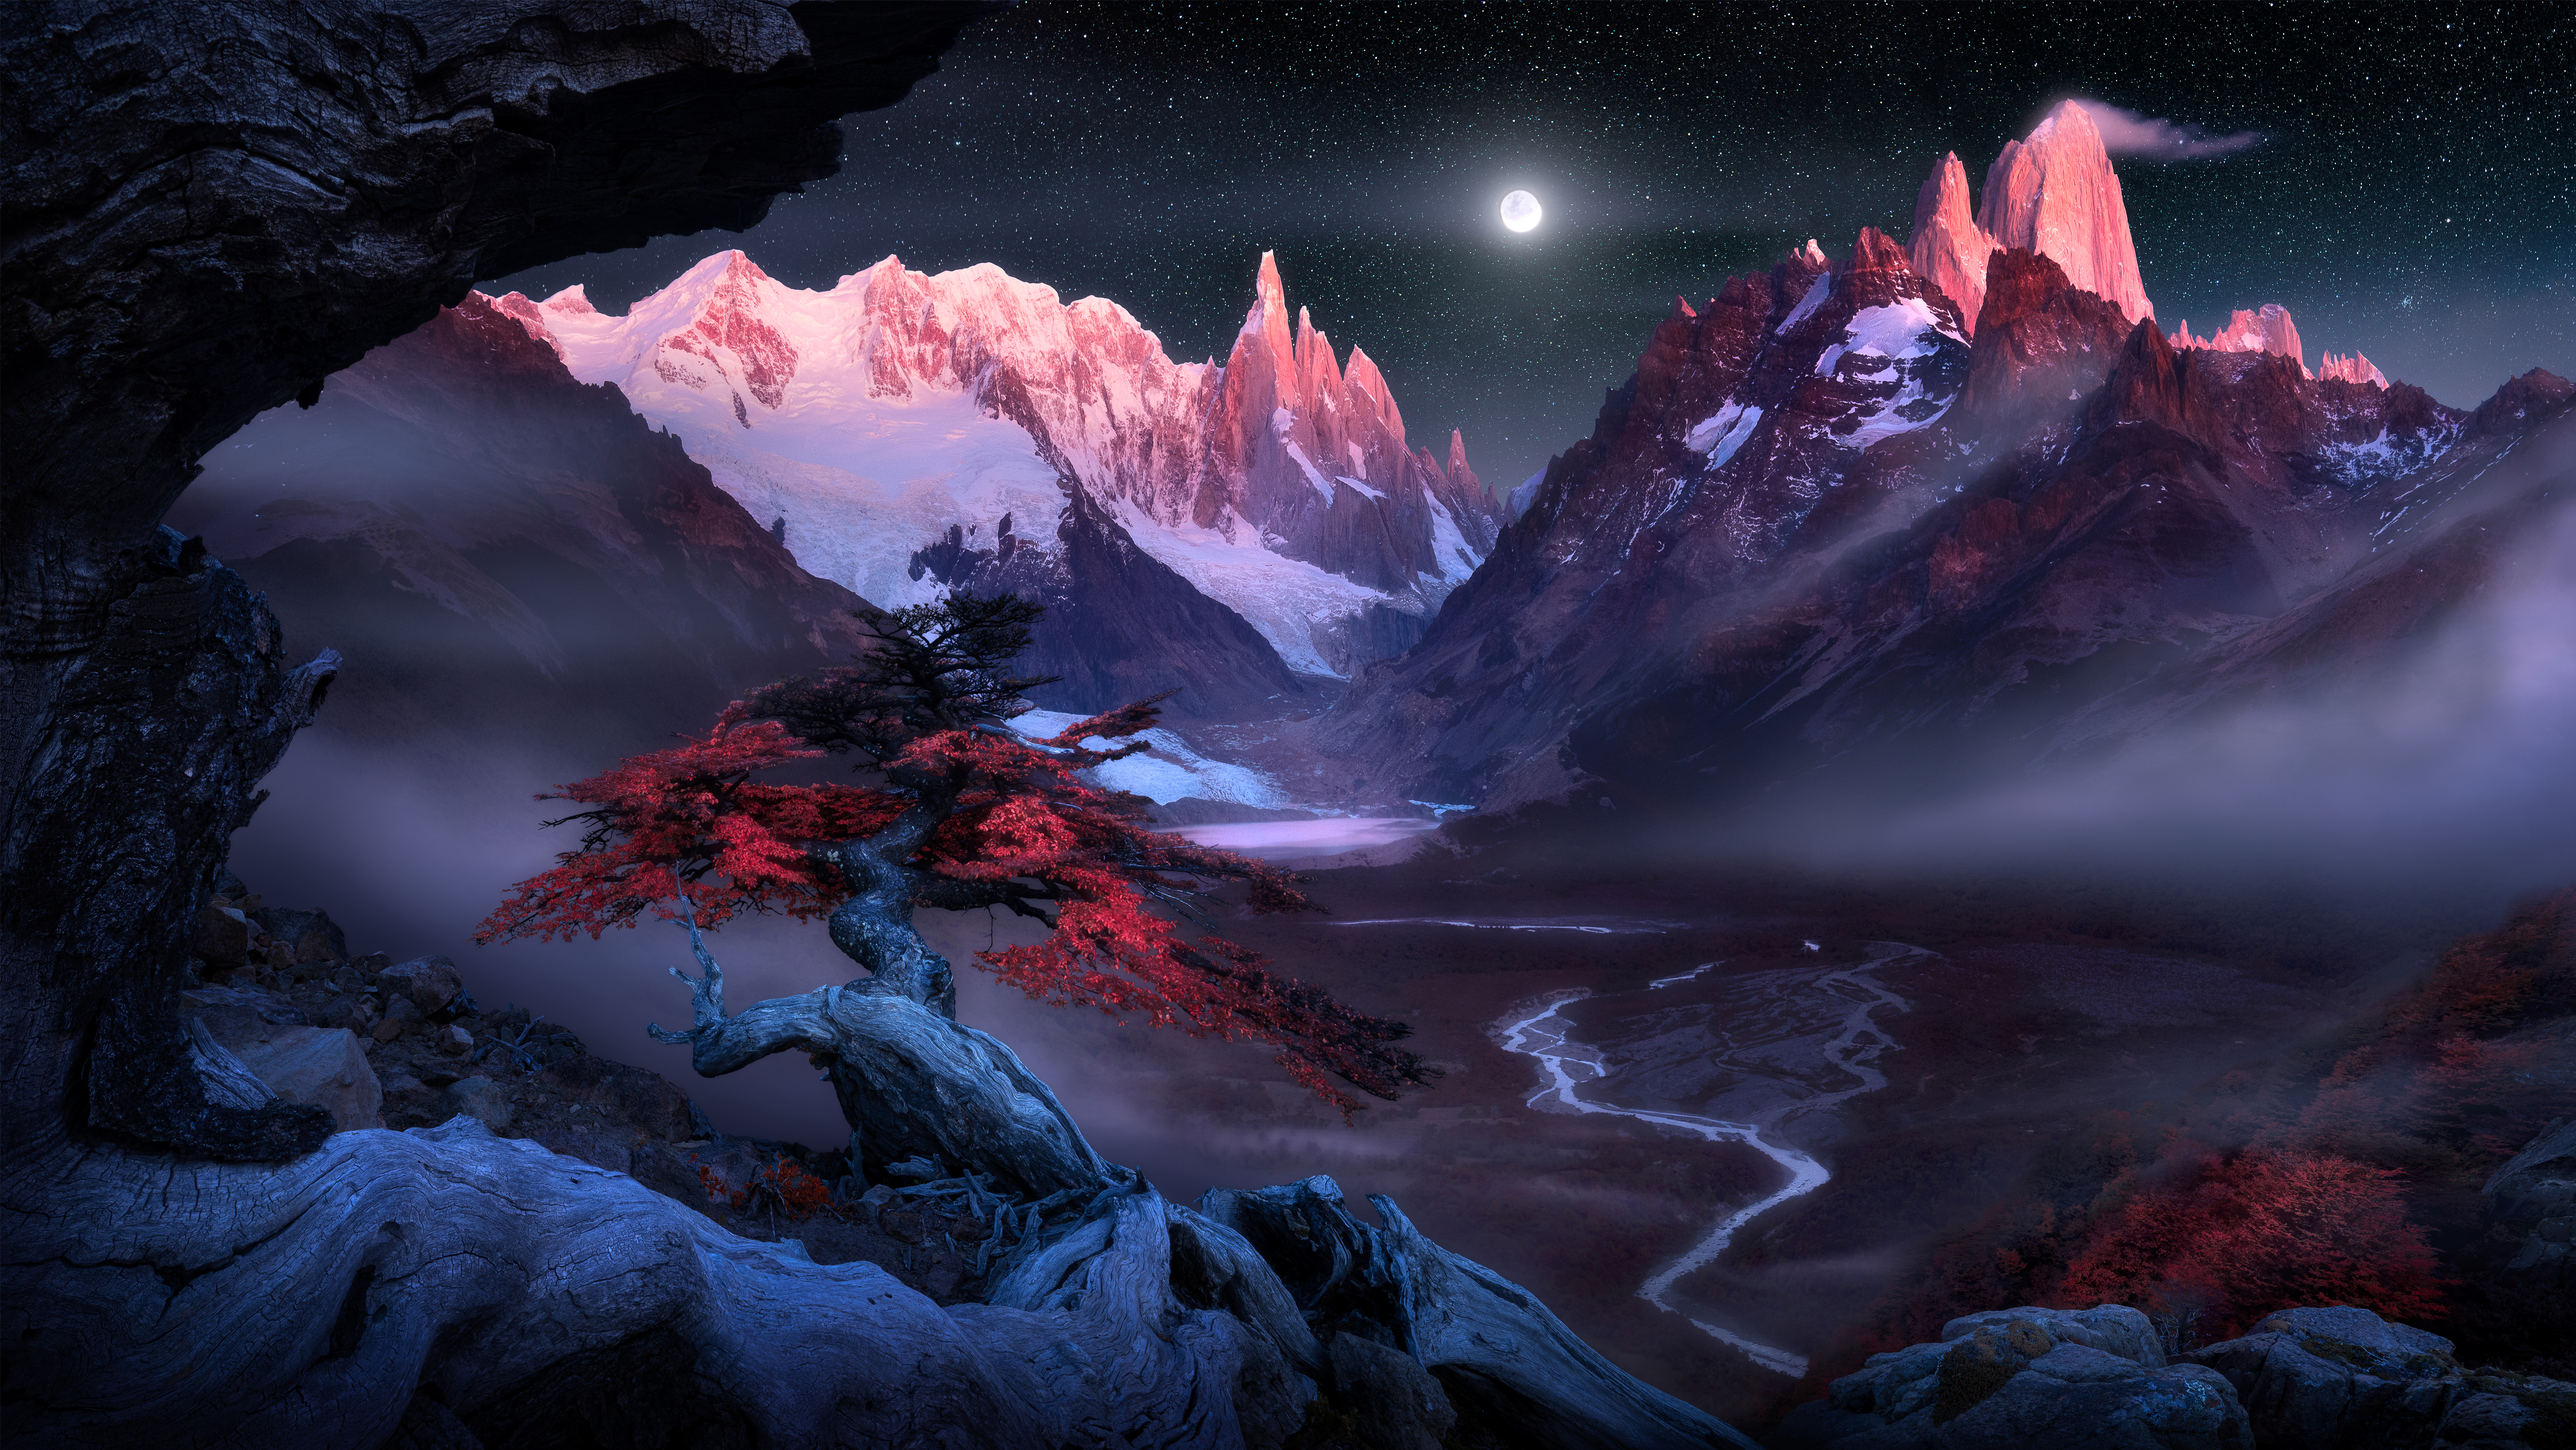 General 5120x2881 landscape nature mountains Patagonia trees night Moon river mist snow nightscape starry night moonlight full moon stars snowy mountain Argentina digital art